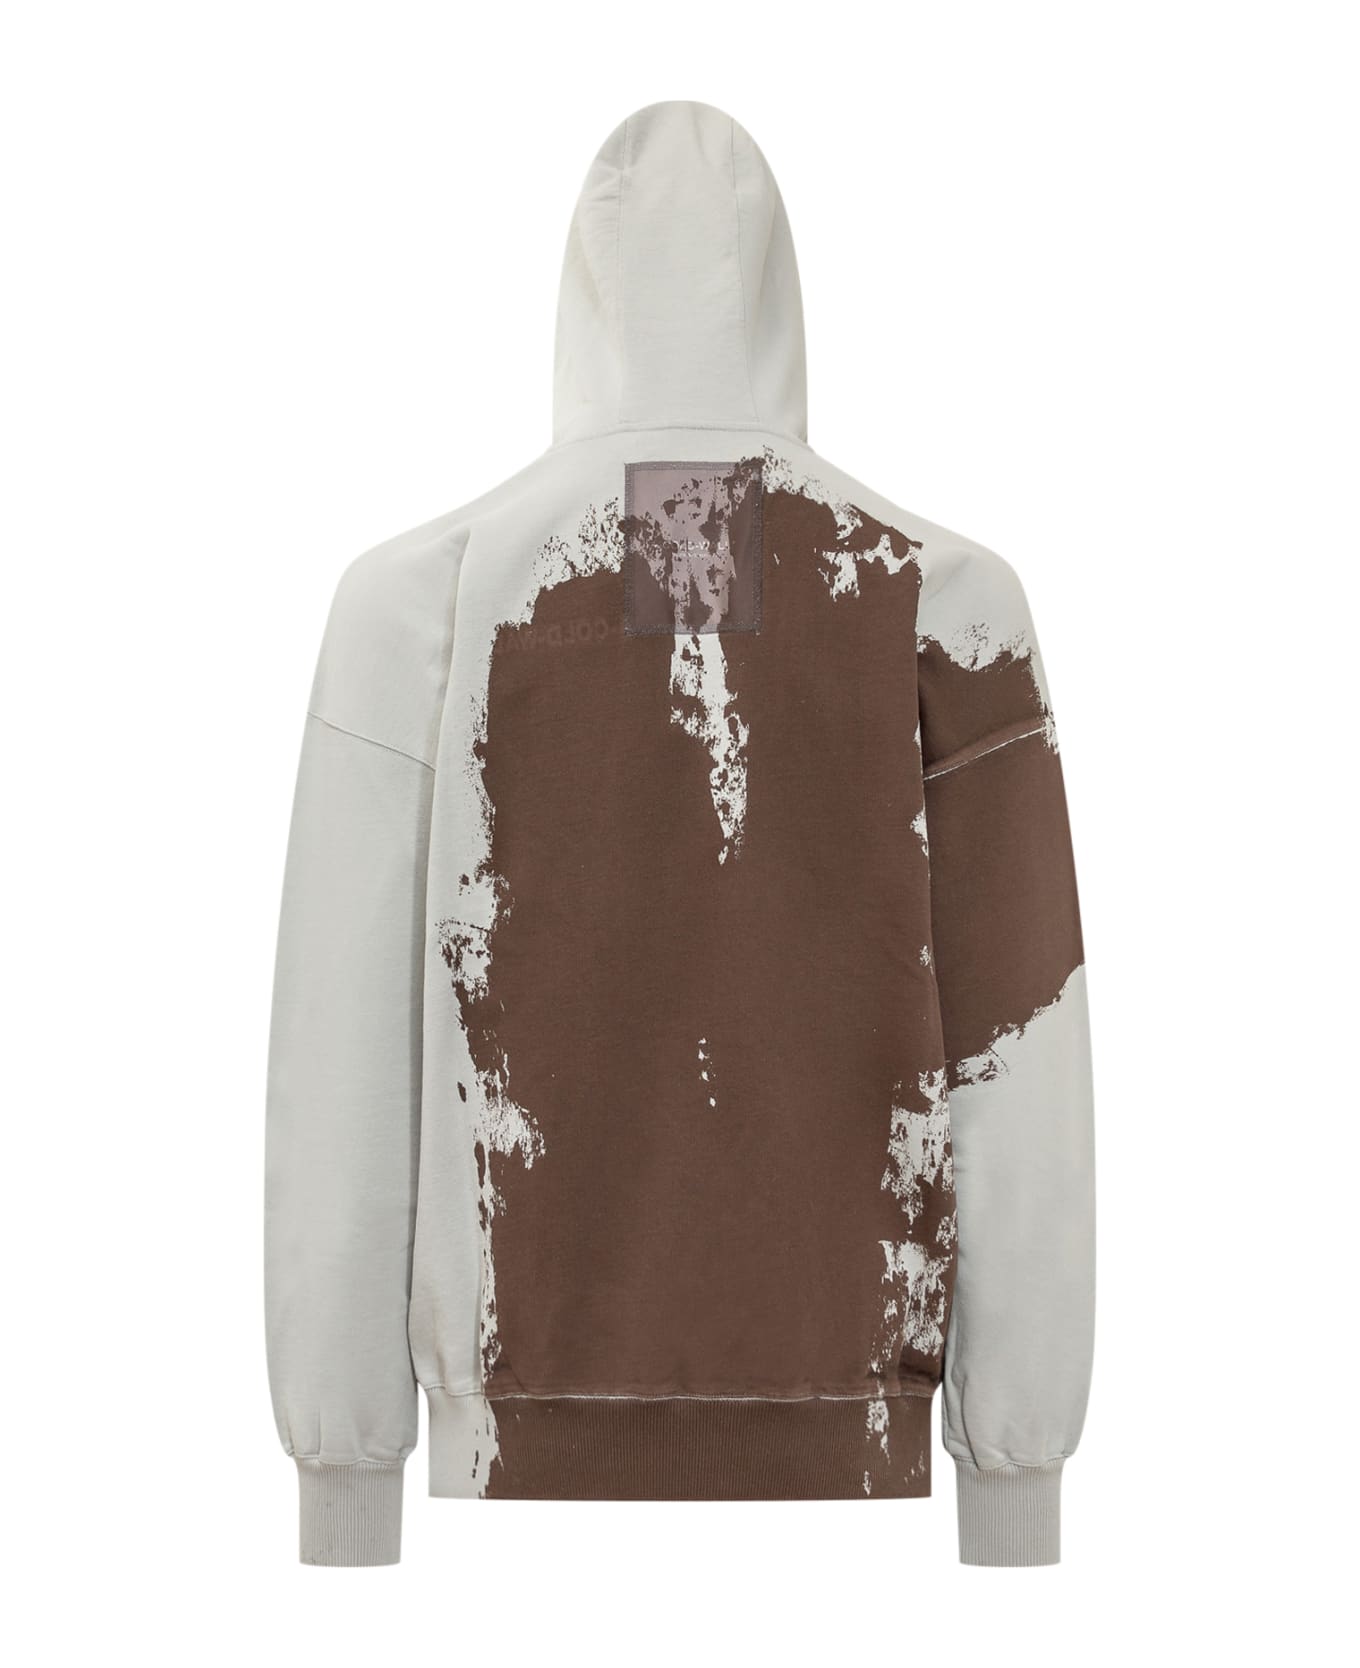 A-COLD-WALL Relaxed Studio Hoodie - DARK BROWN